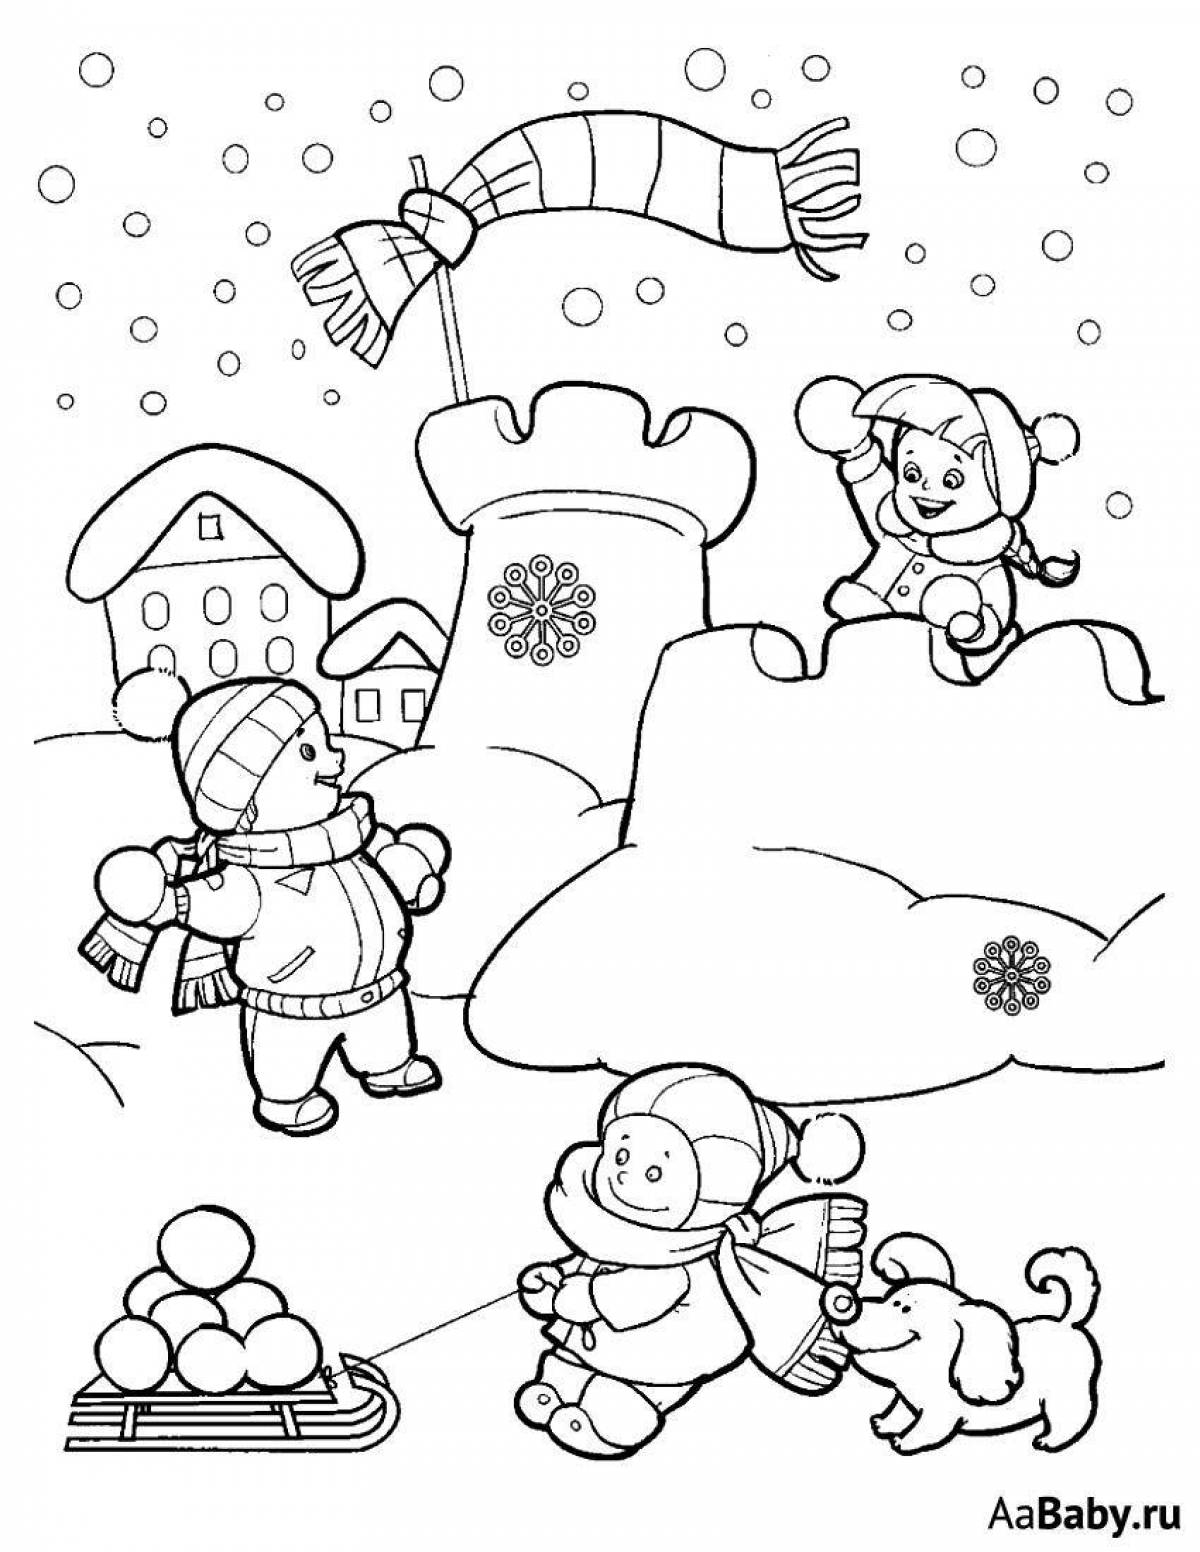 Adorable winter coloring book for 5 year olds